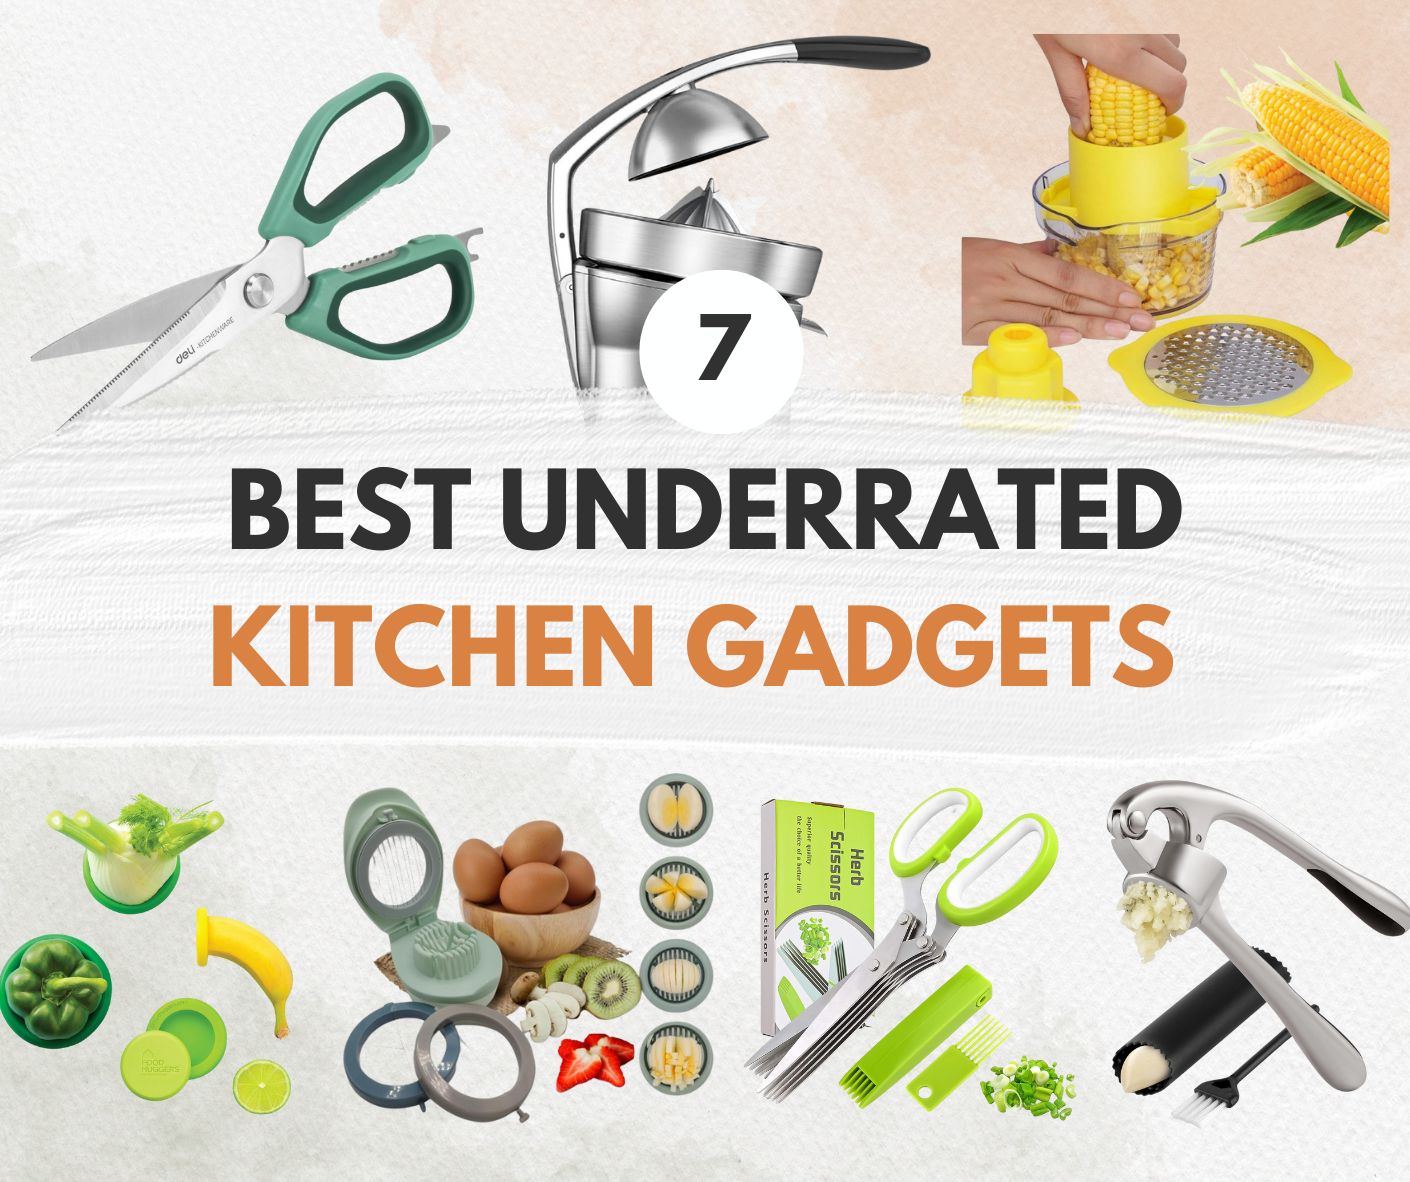 7 Underrated Kitchen Gadgets for Seamless Cooking - Reviewed